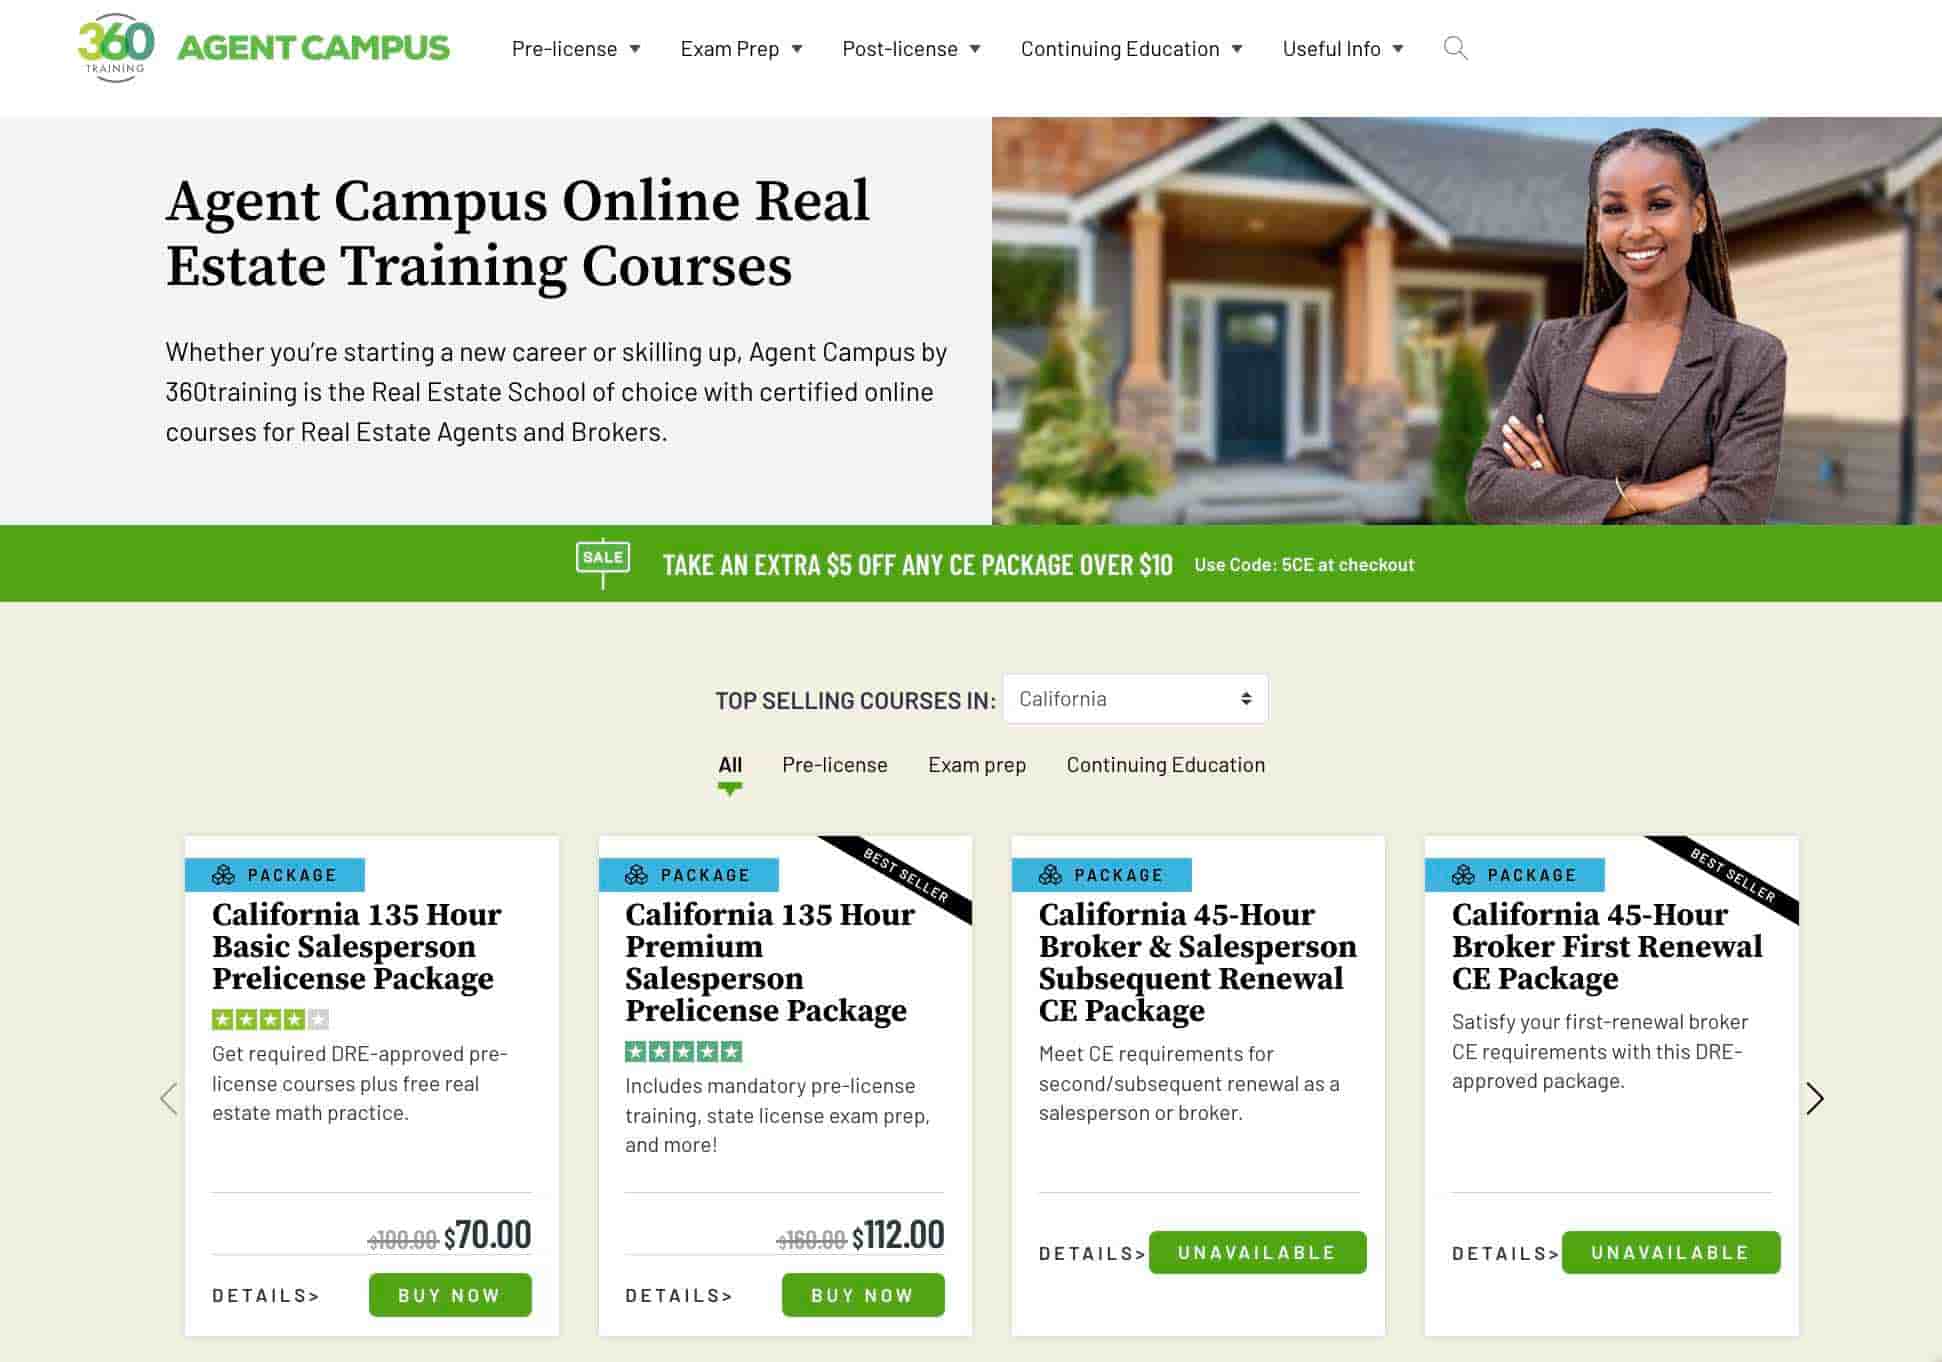 Agent Campus by 360training